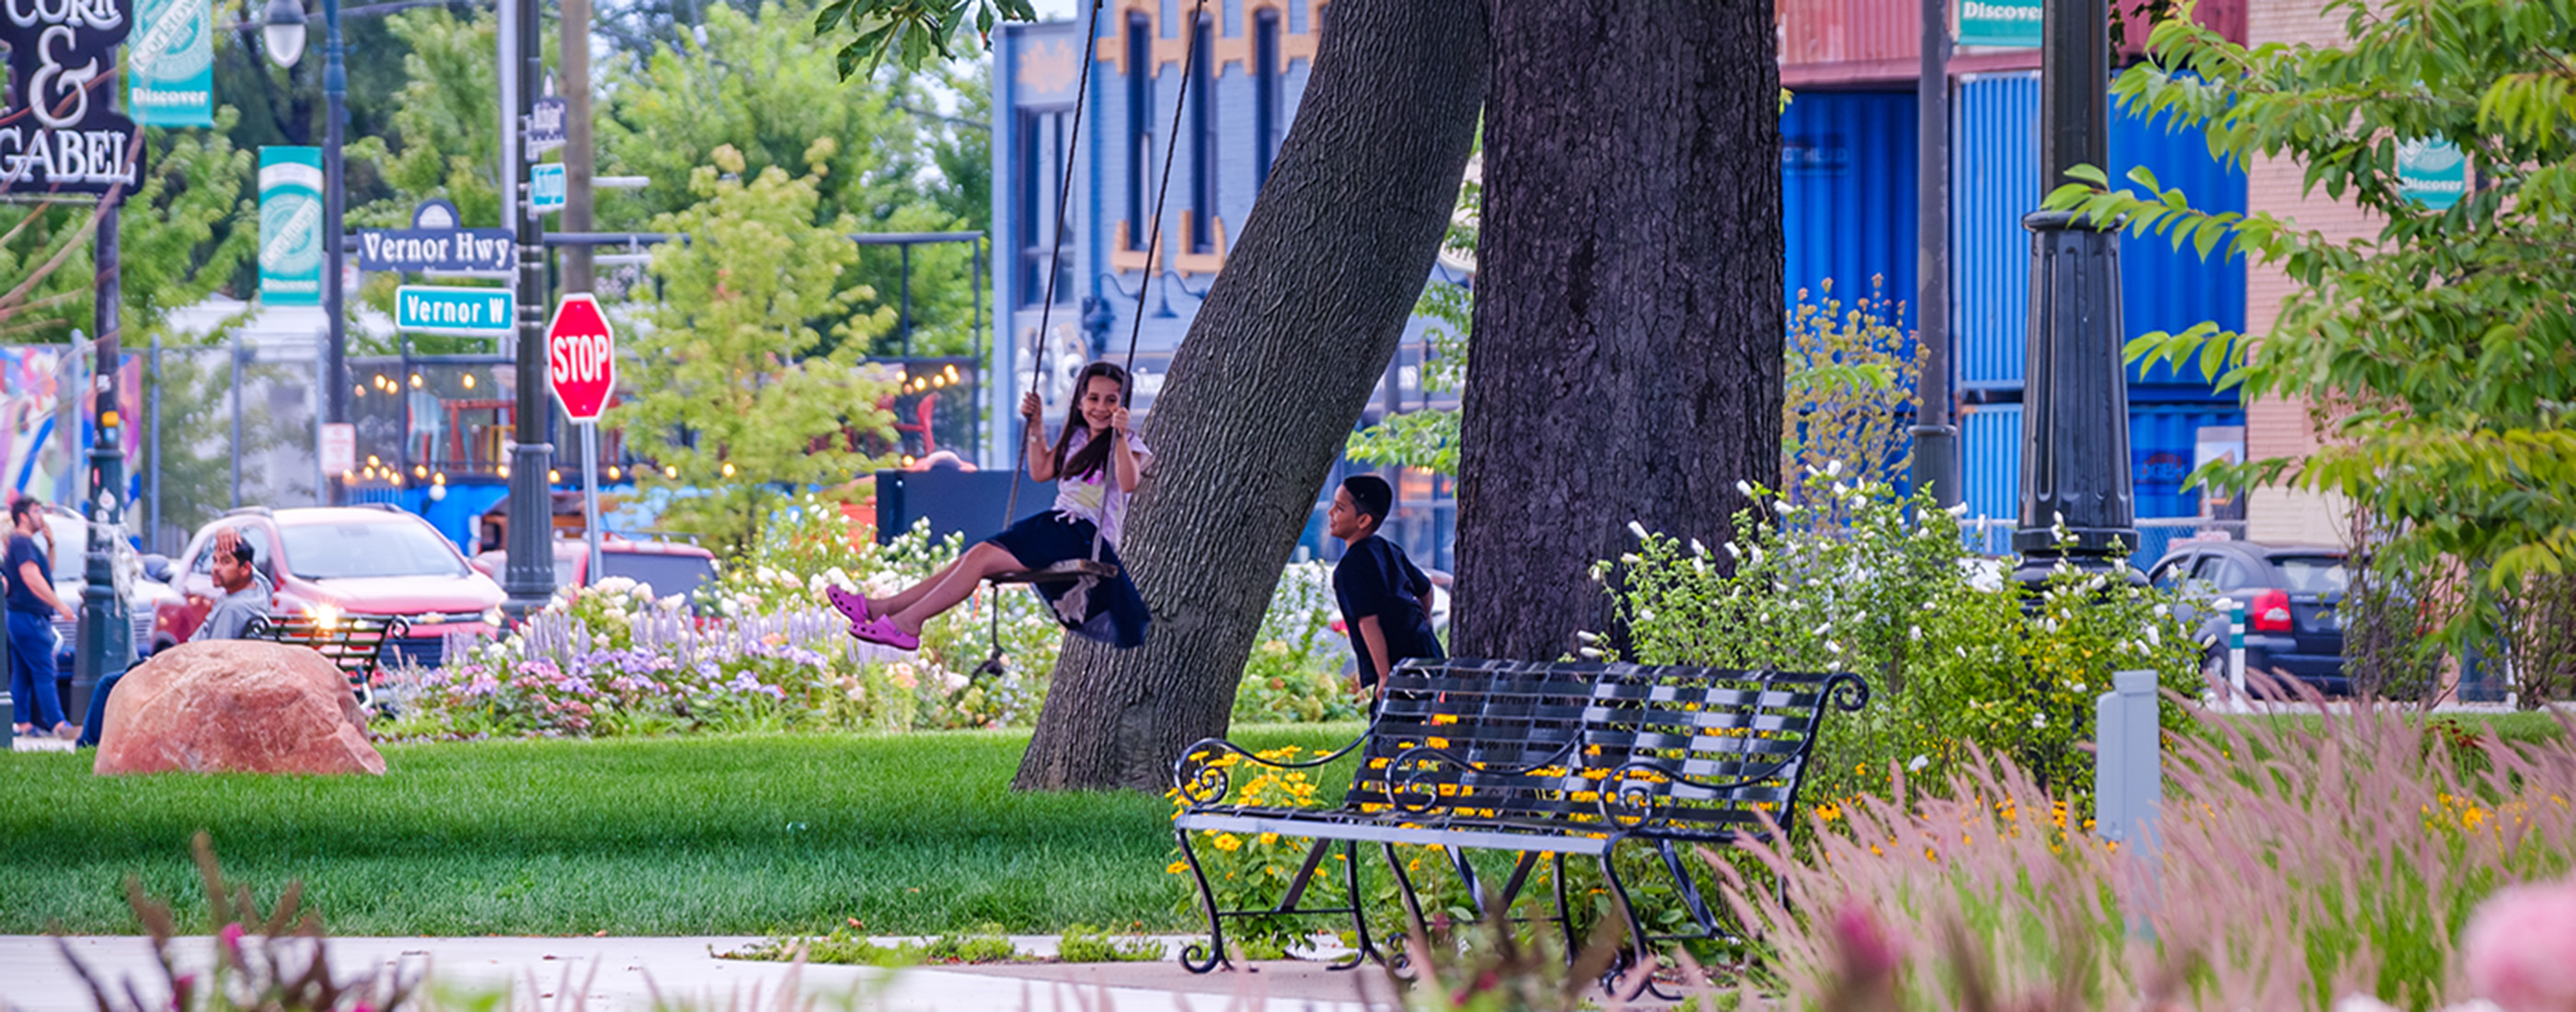 Children play on one of the tree swings in Roosevelt Park